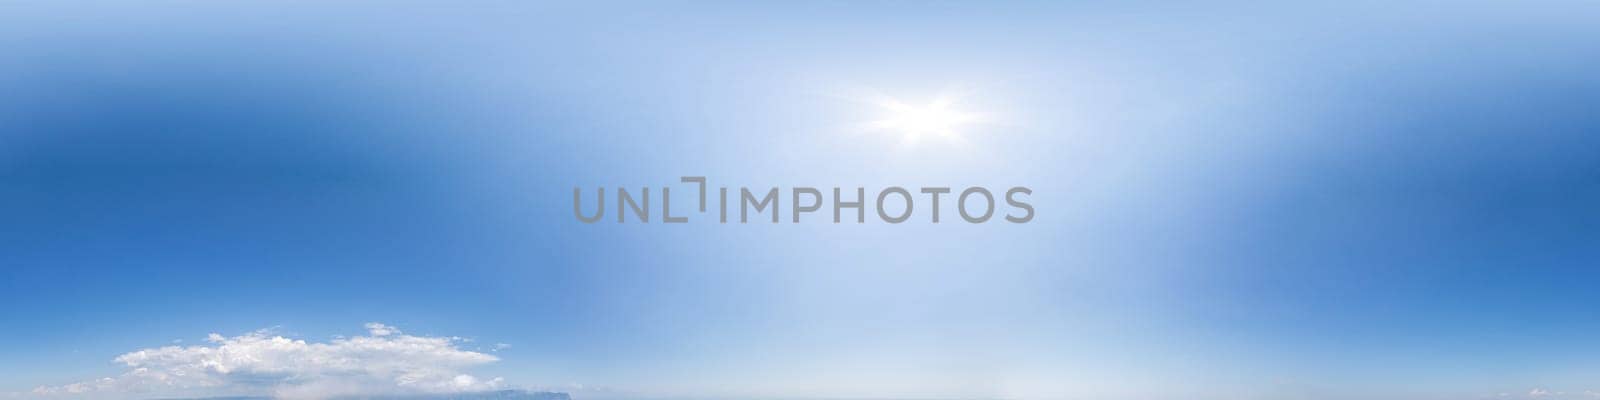 panorama of sky with clouds without ground, for easy use in 3D graphics and panorama for composites in aerial and ground spherical panoramas as a sky dome. by panophotograph